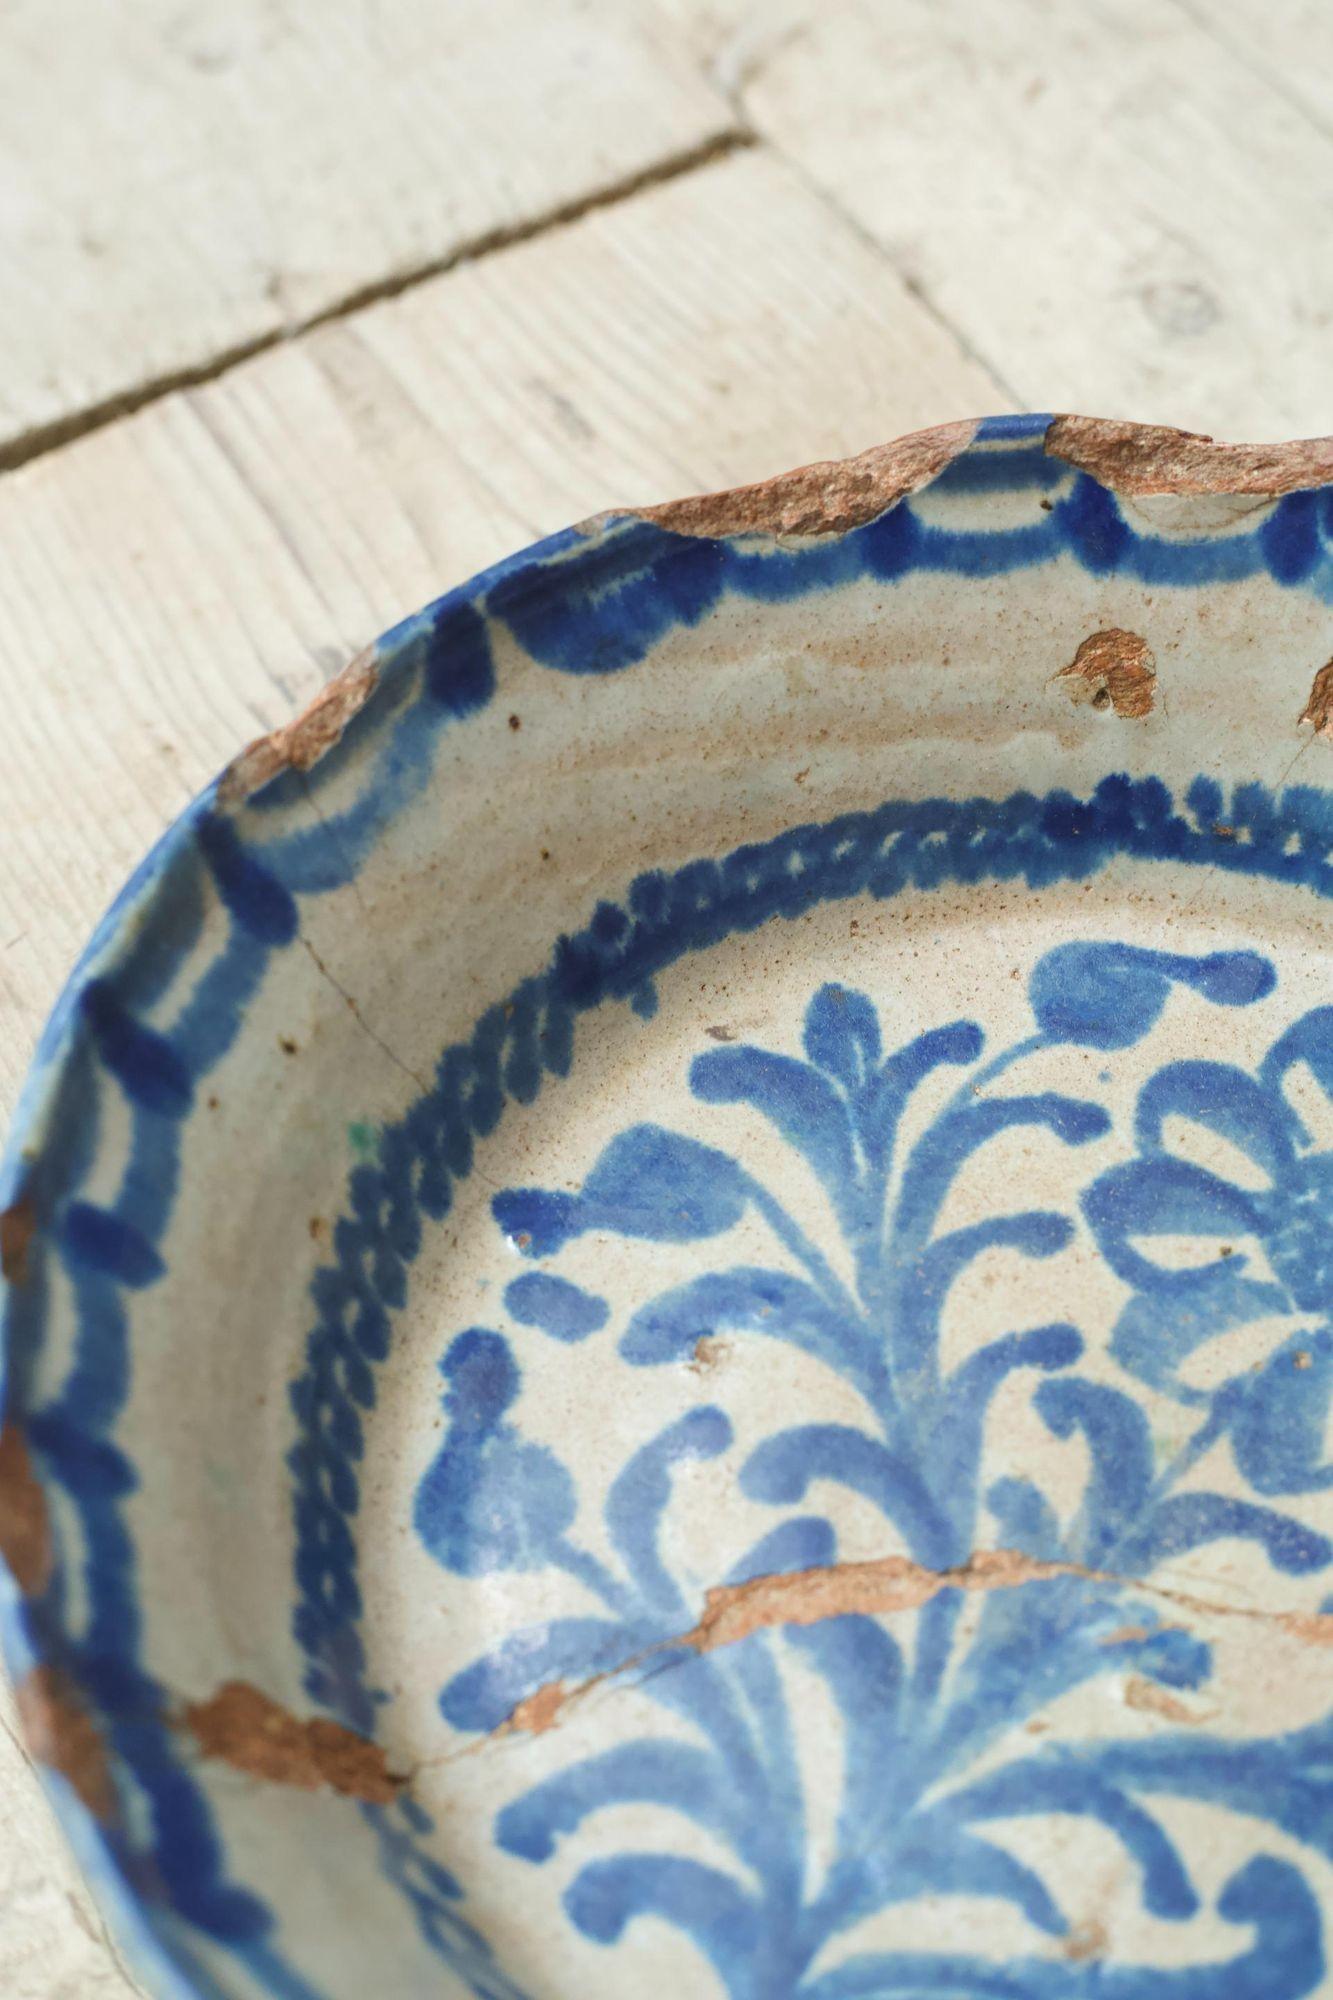 I have been lucky enough to find a great collection of these stunning 18th century blue and white Spanish bowls. Decorated with floral and abstract decoration making them hugely decorative. All have minor issues with their condition but to me things